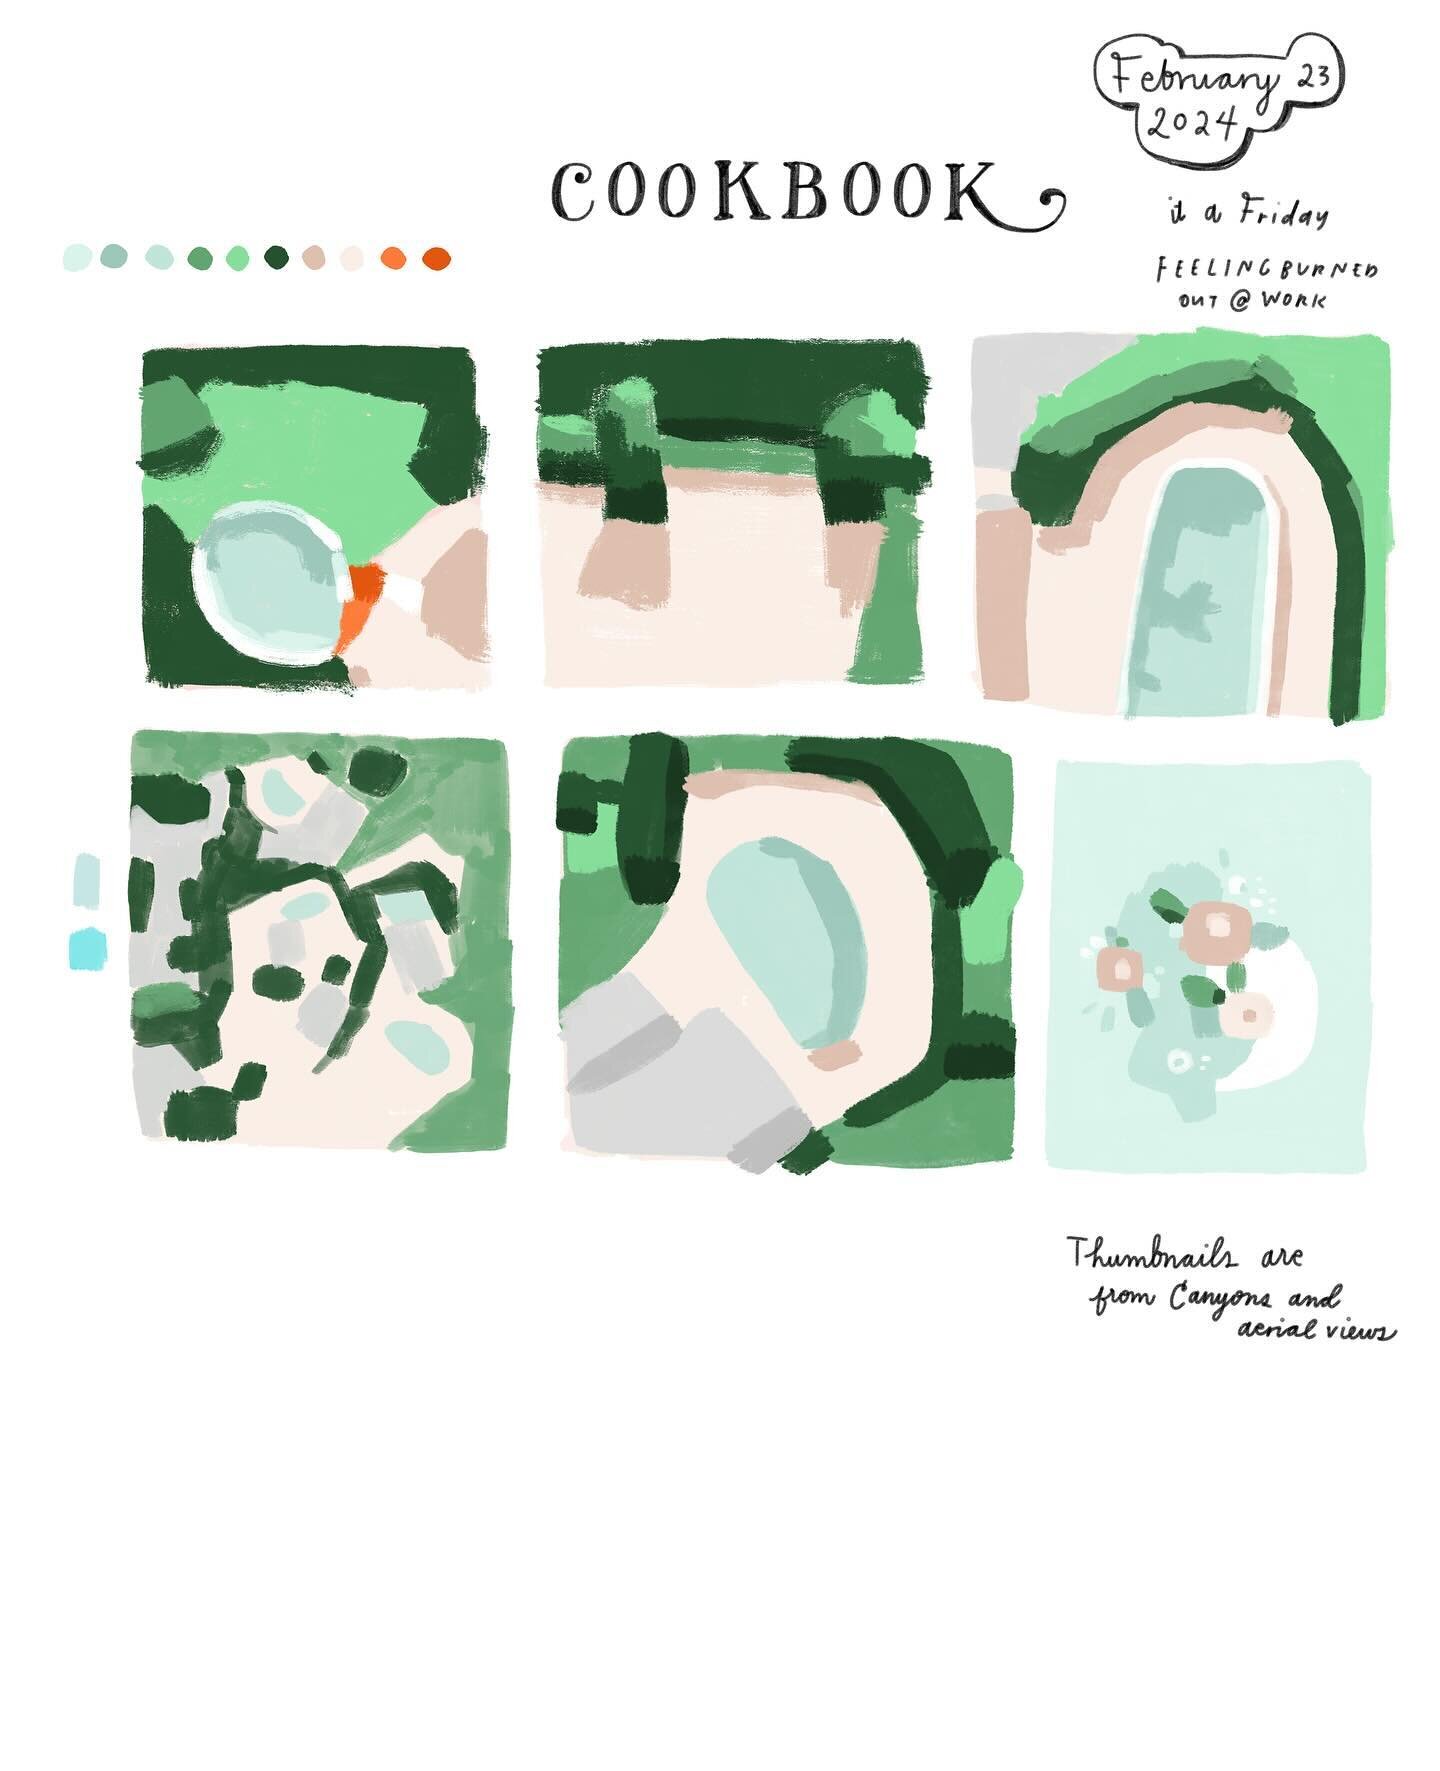 We had this cookbook growing up and it always fascinated me. I think at first because of the beautiful cakes but as I got older I loved it for a different reason&mdash;those fonts and illustrations are 😍 I sold the book when I moved, regretted it, a